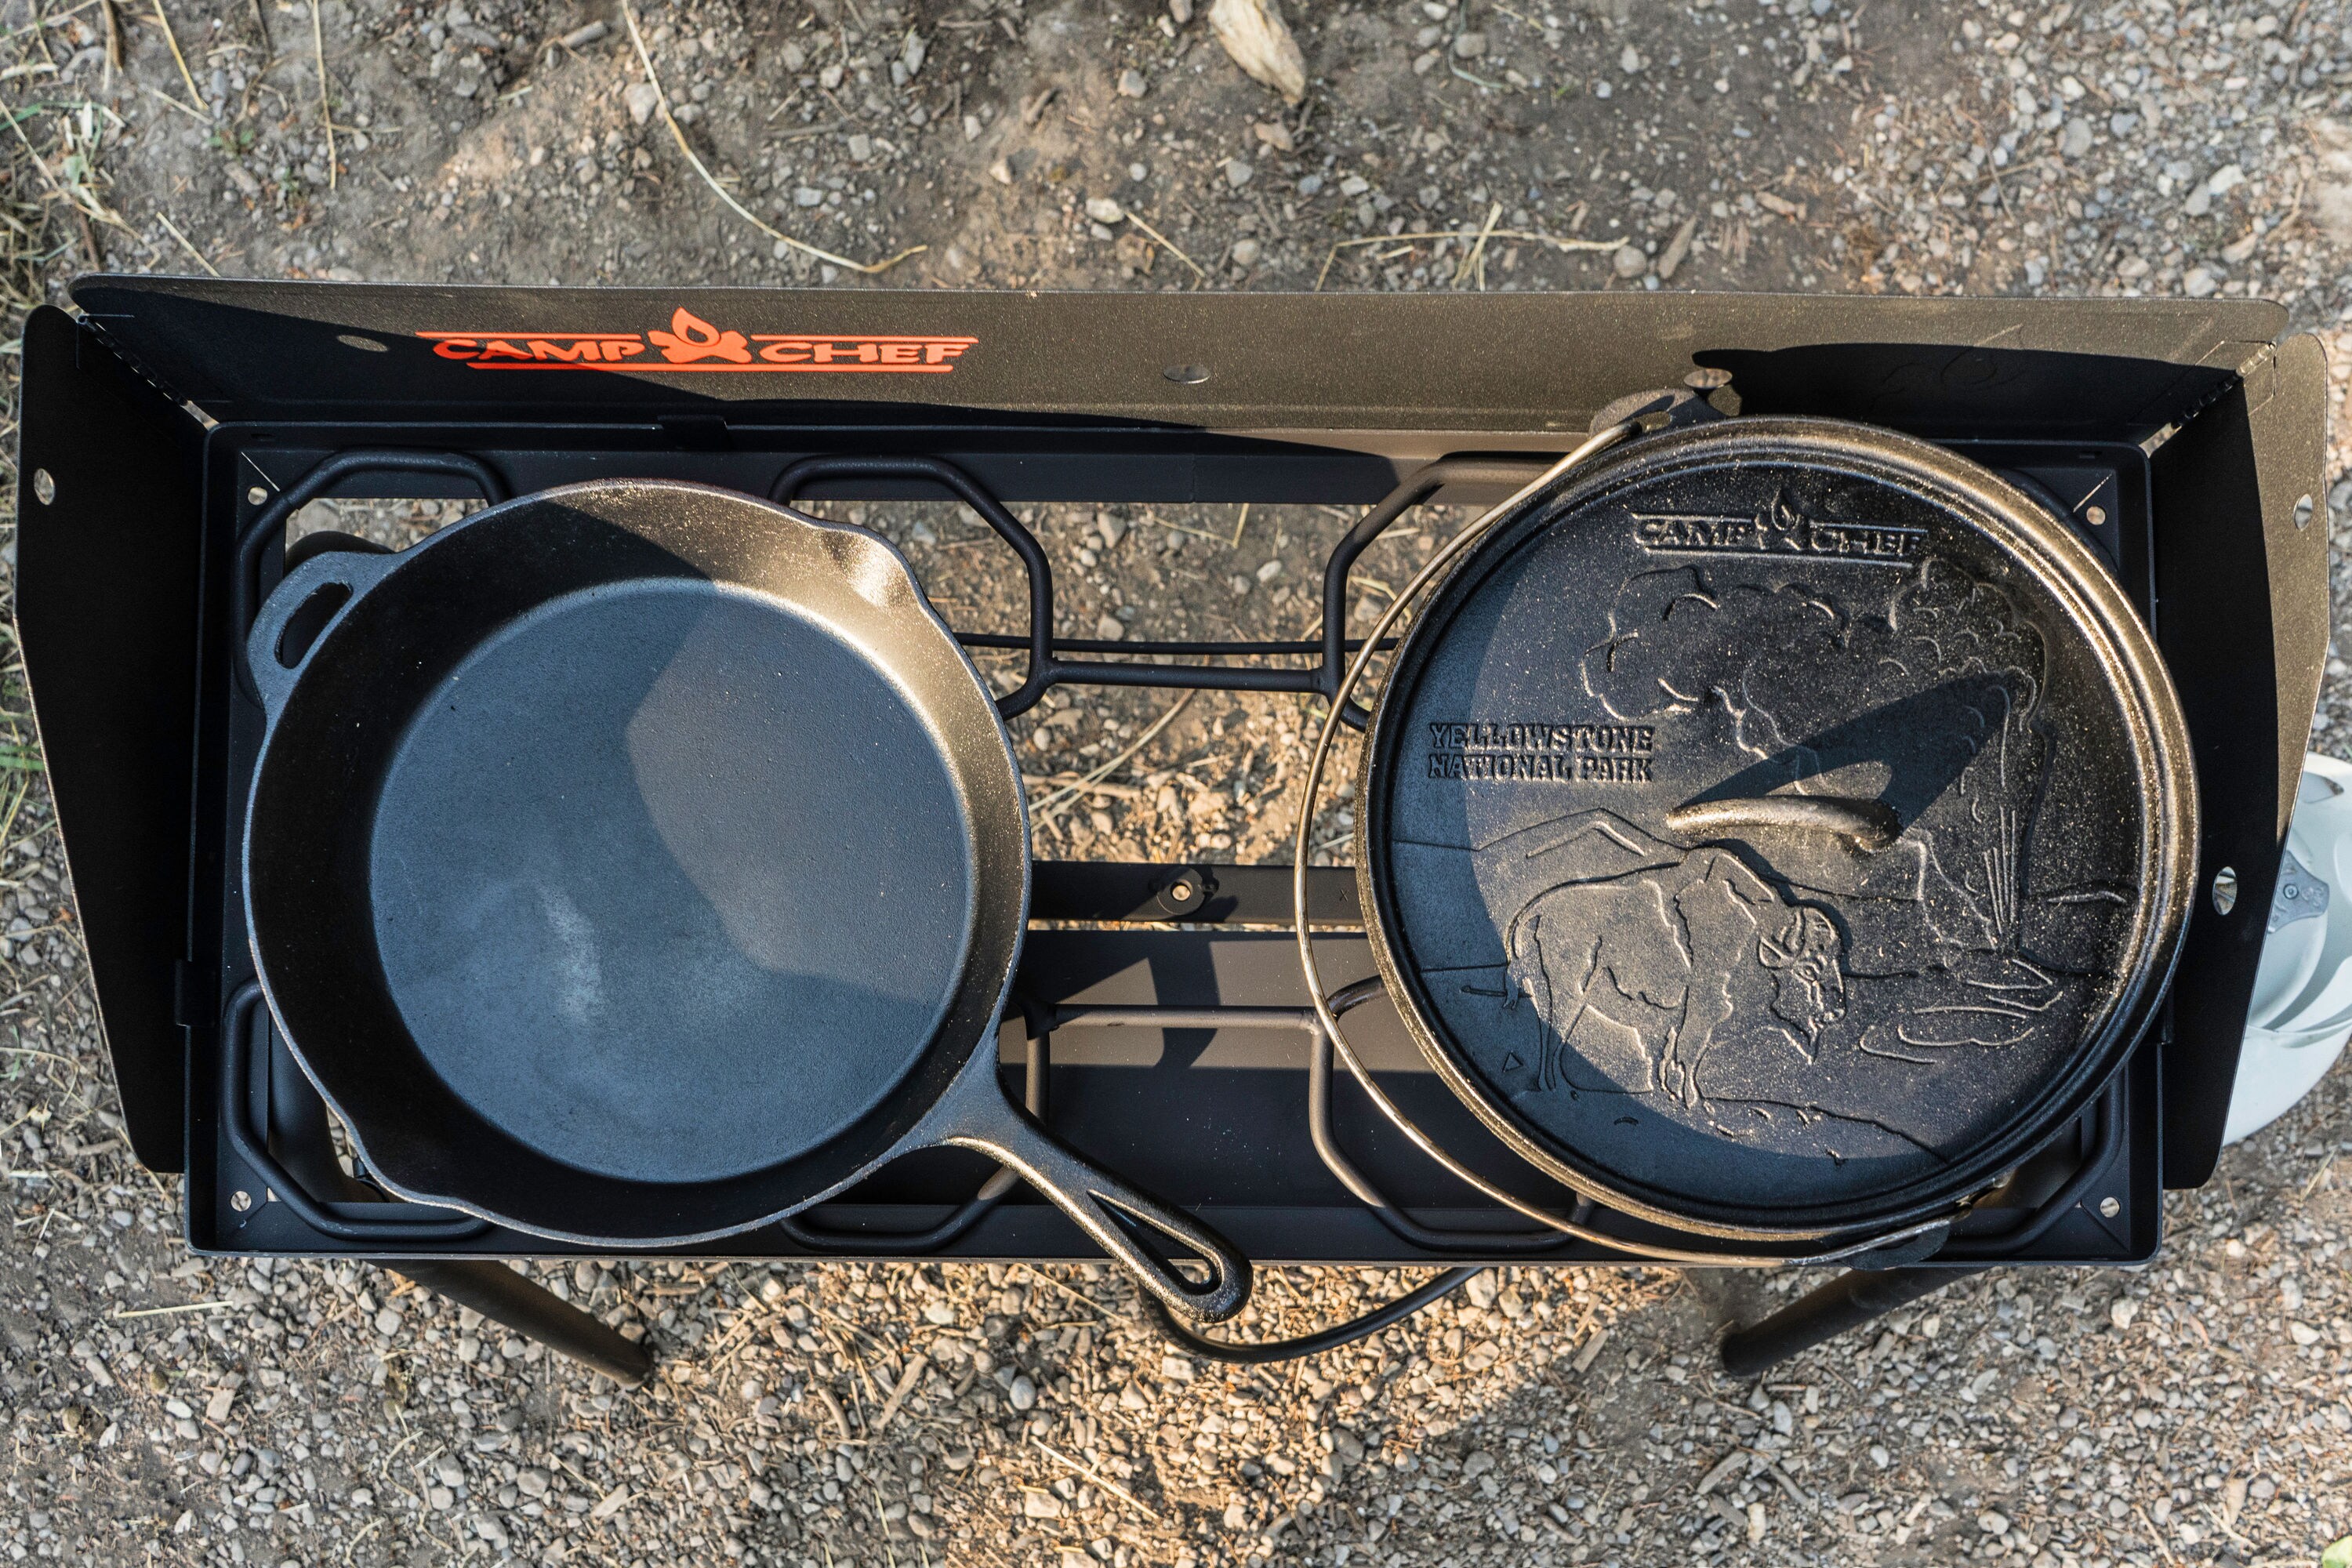 National Parks Cast Iron Set and More | Camp Chef